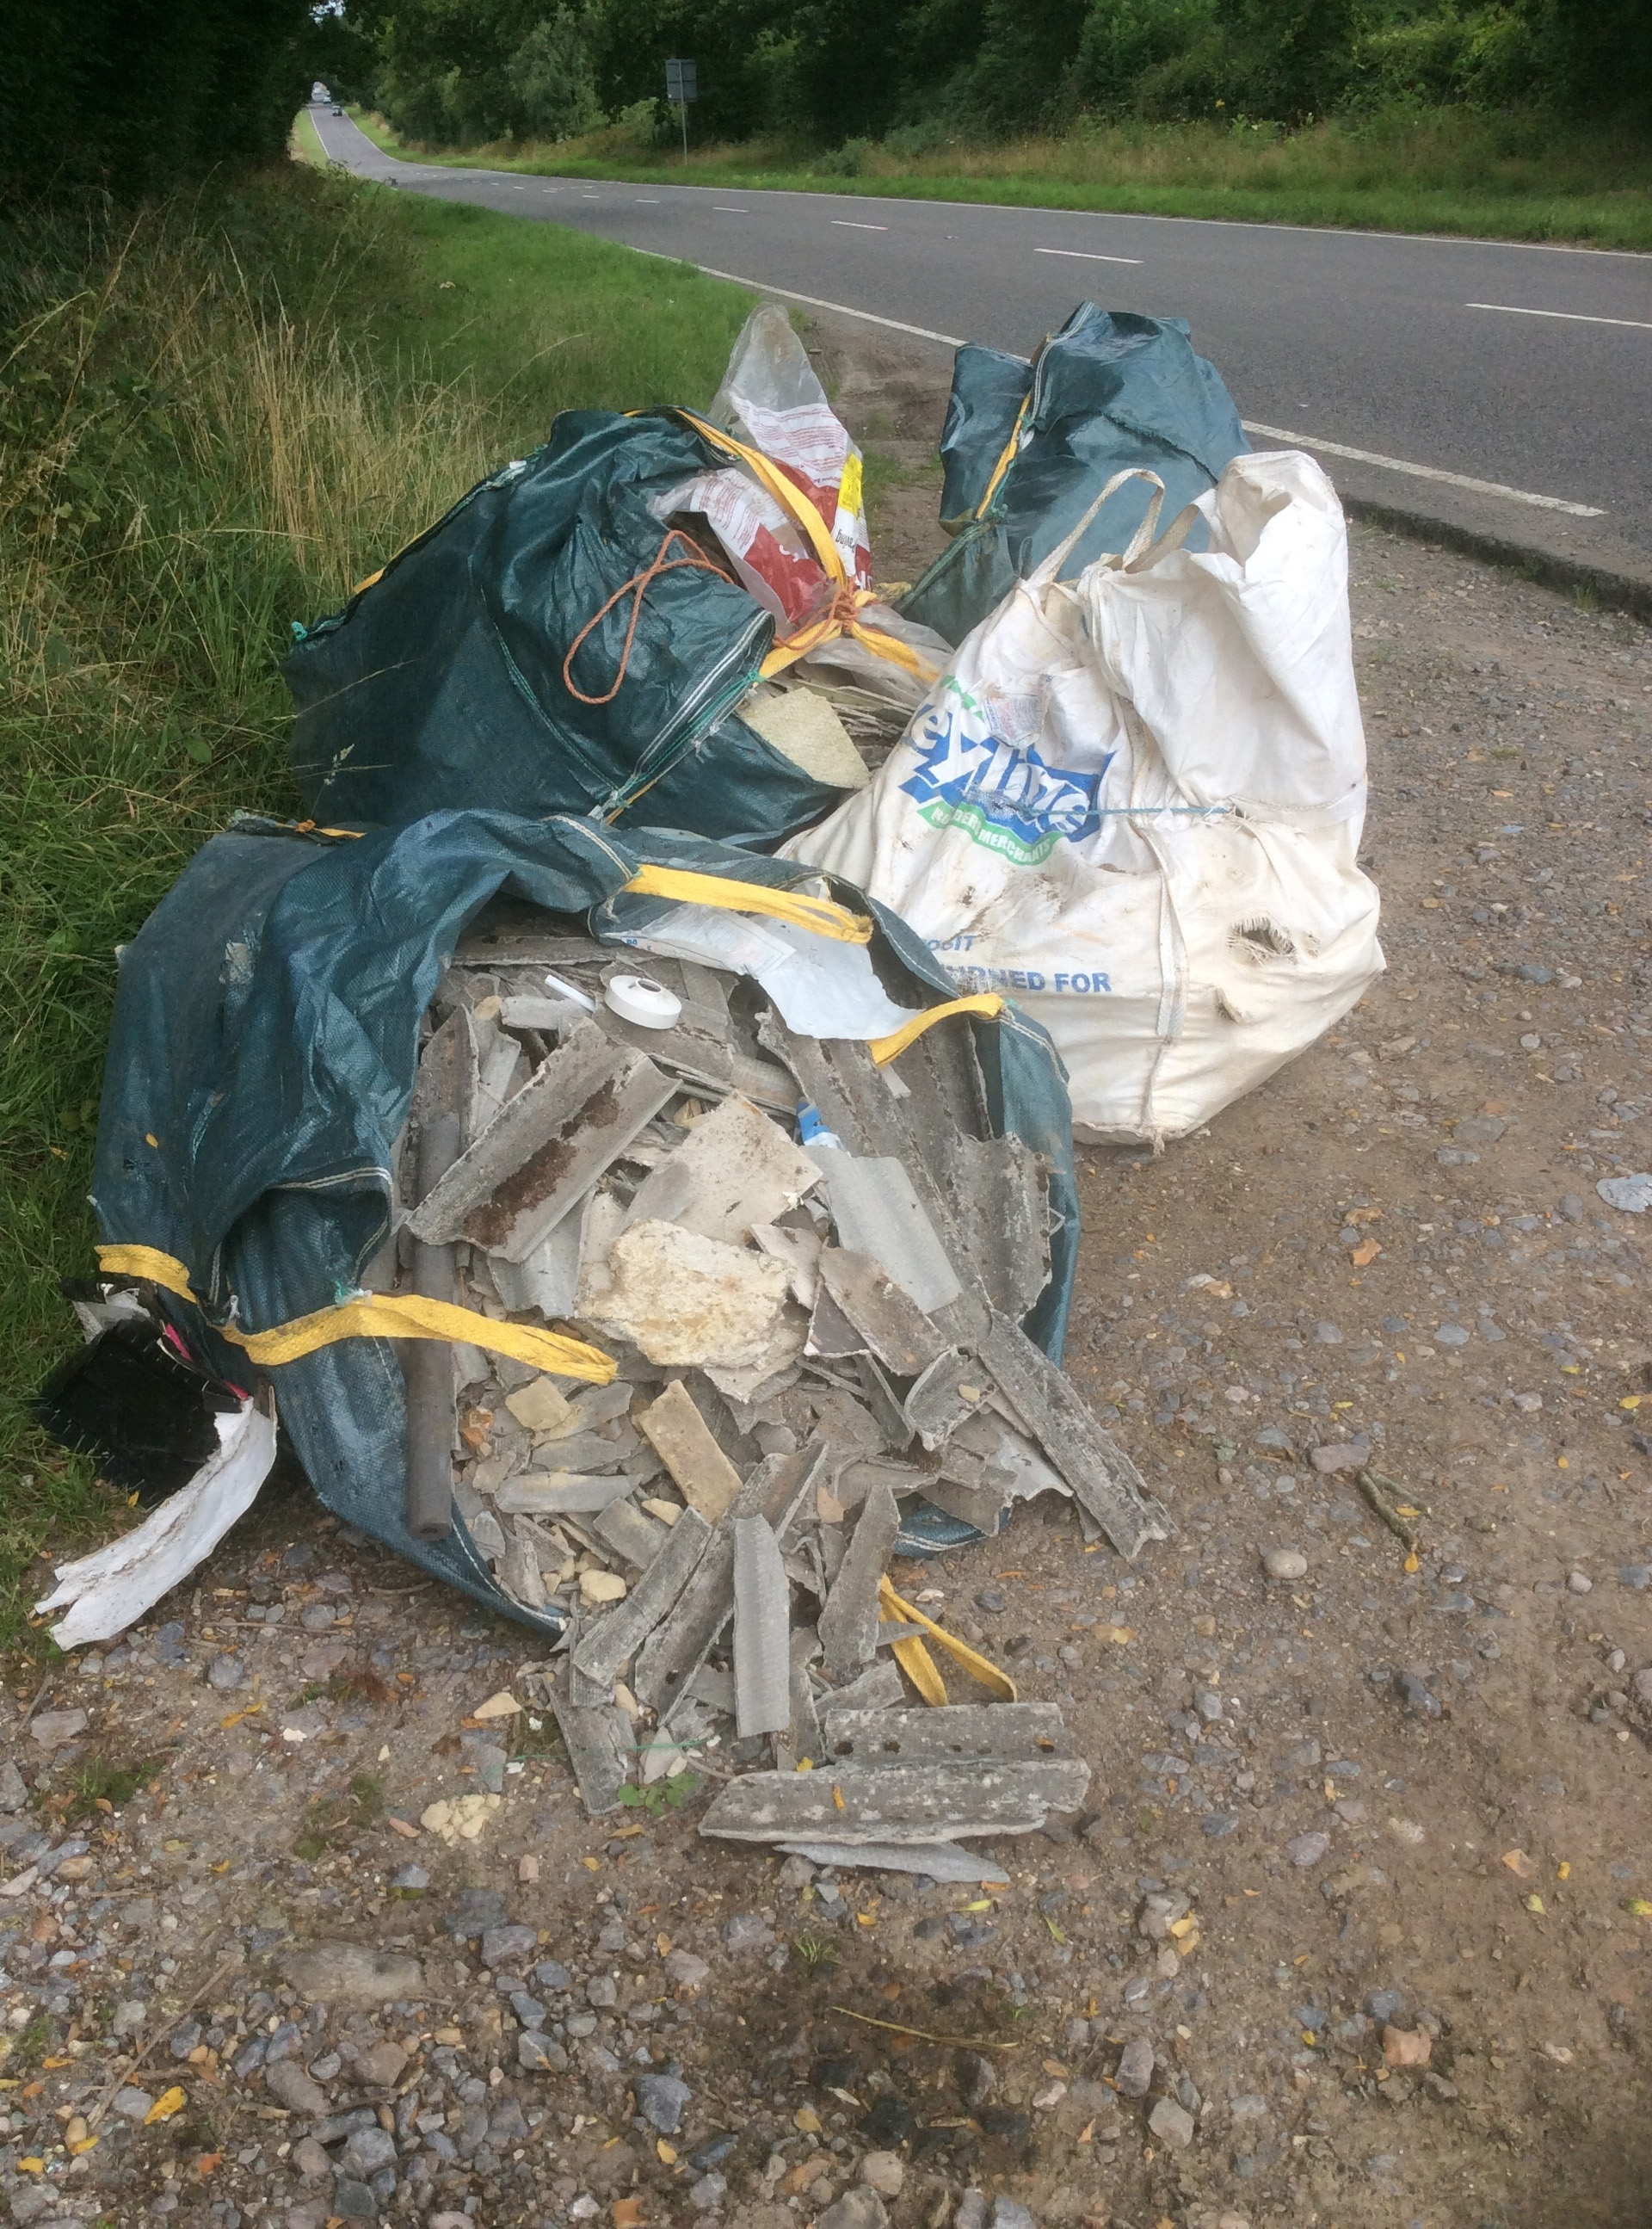 Fly-Tipping L&S Waste Management